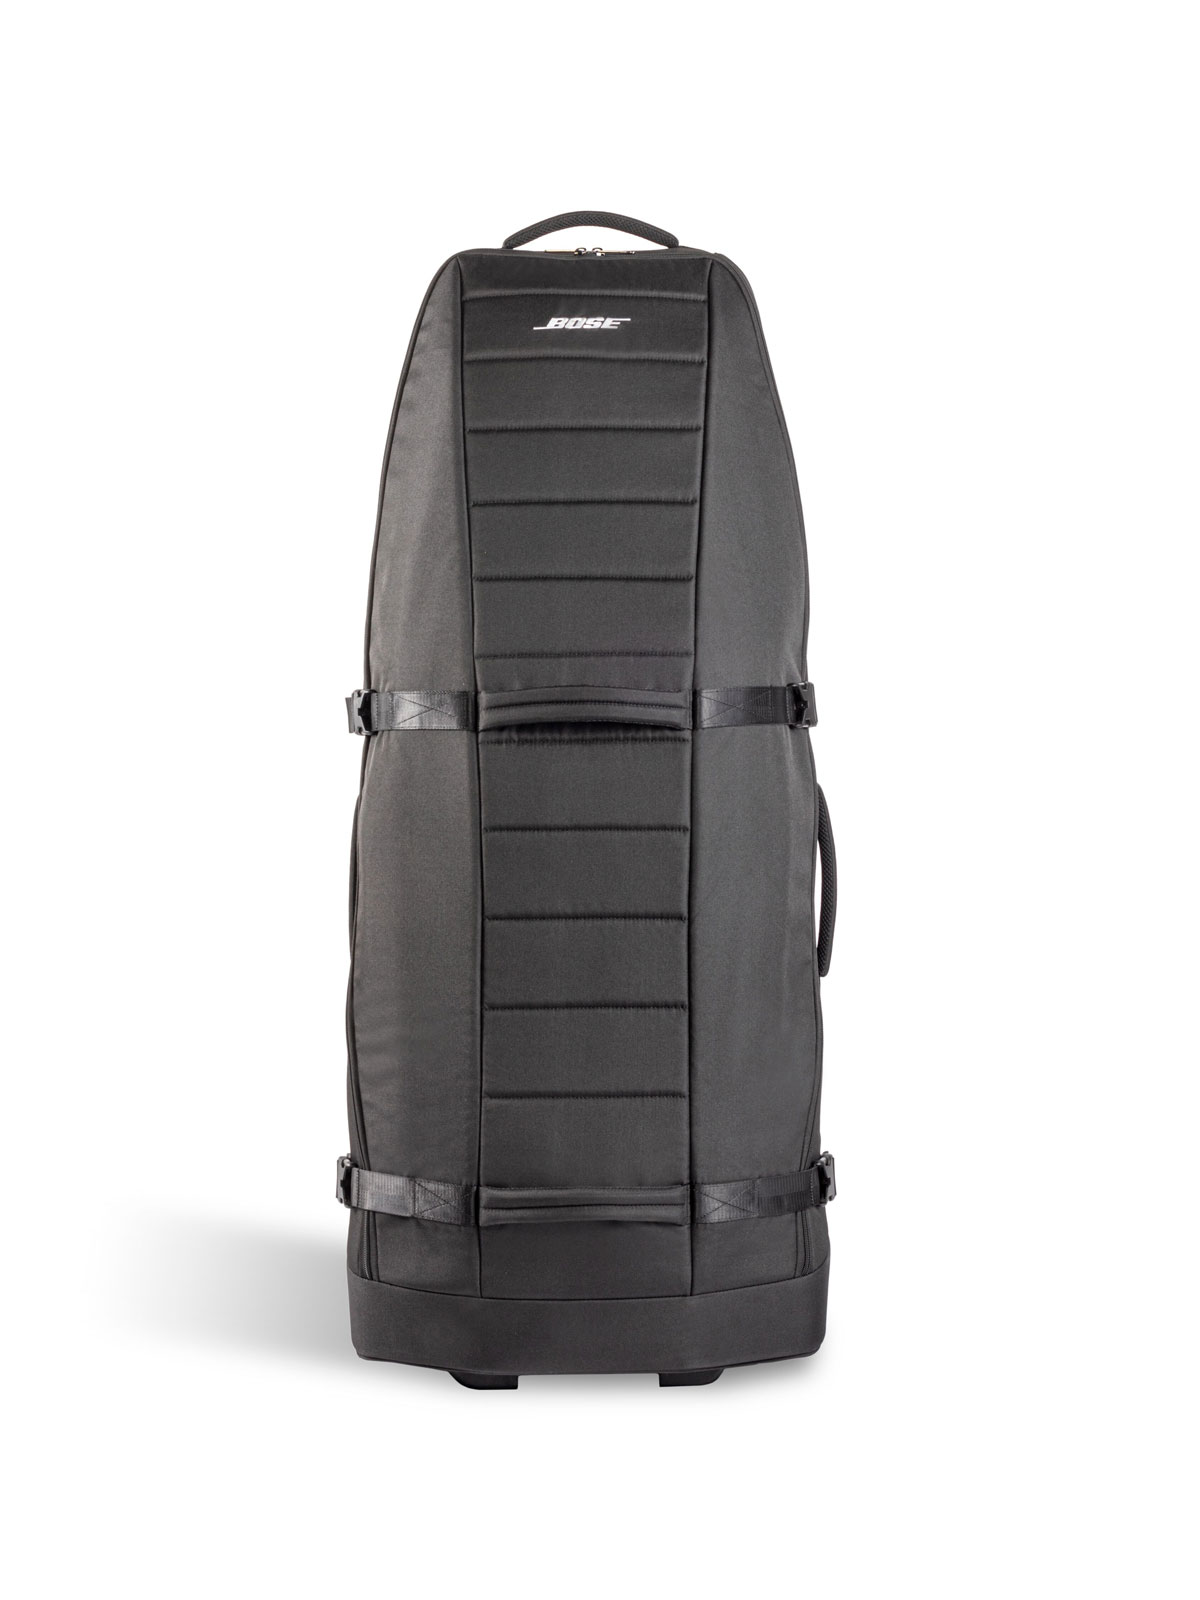 BOSE PROFESSIONAL L1 PRO16 - CARRY BAG ON WHEELS